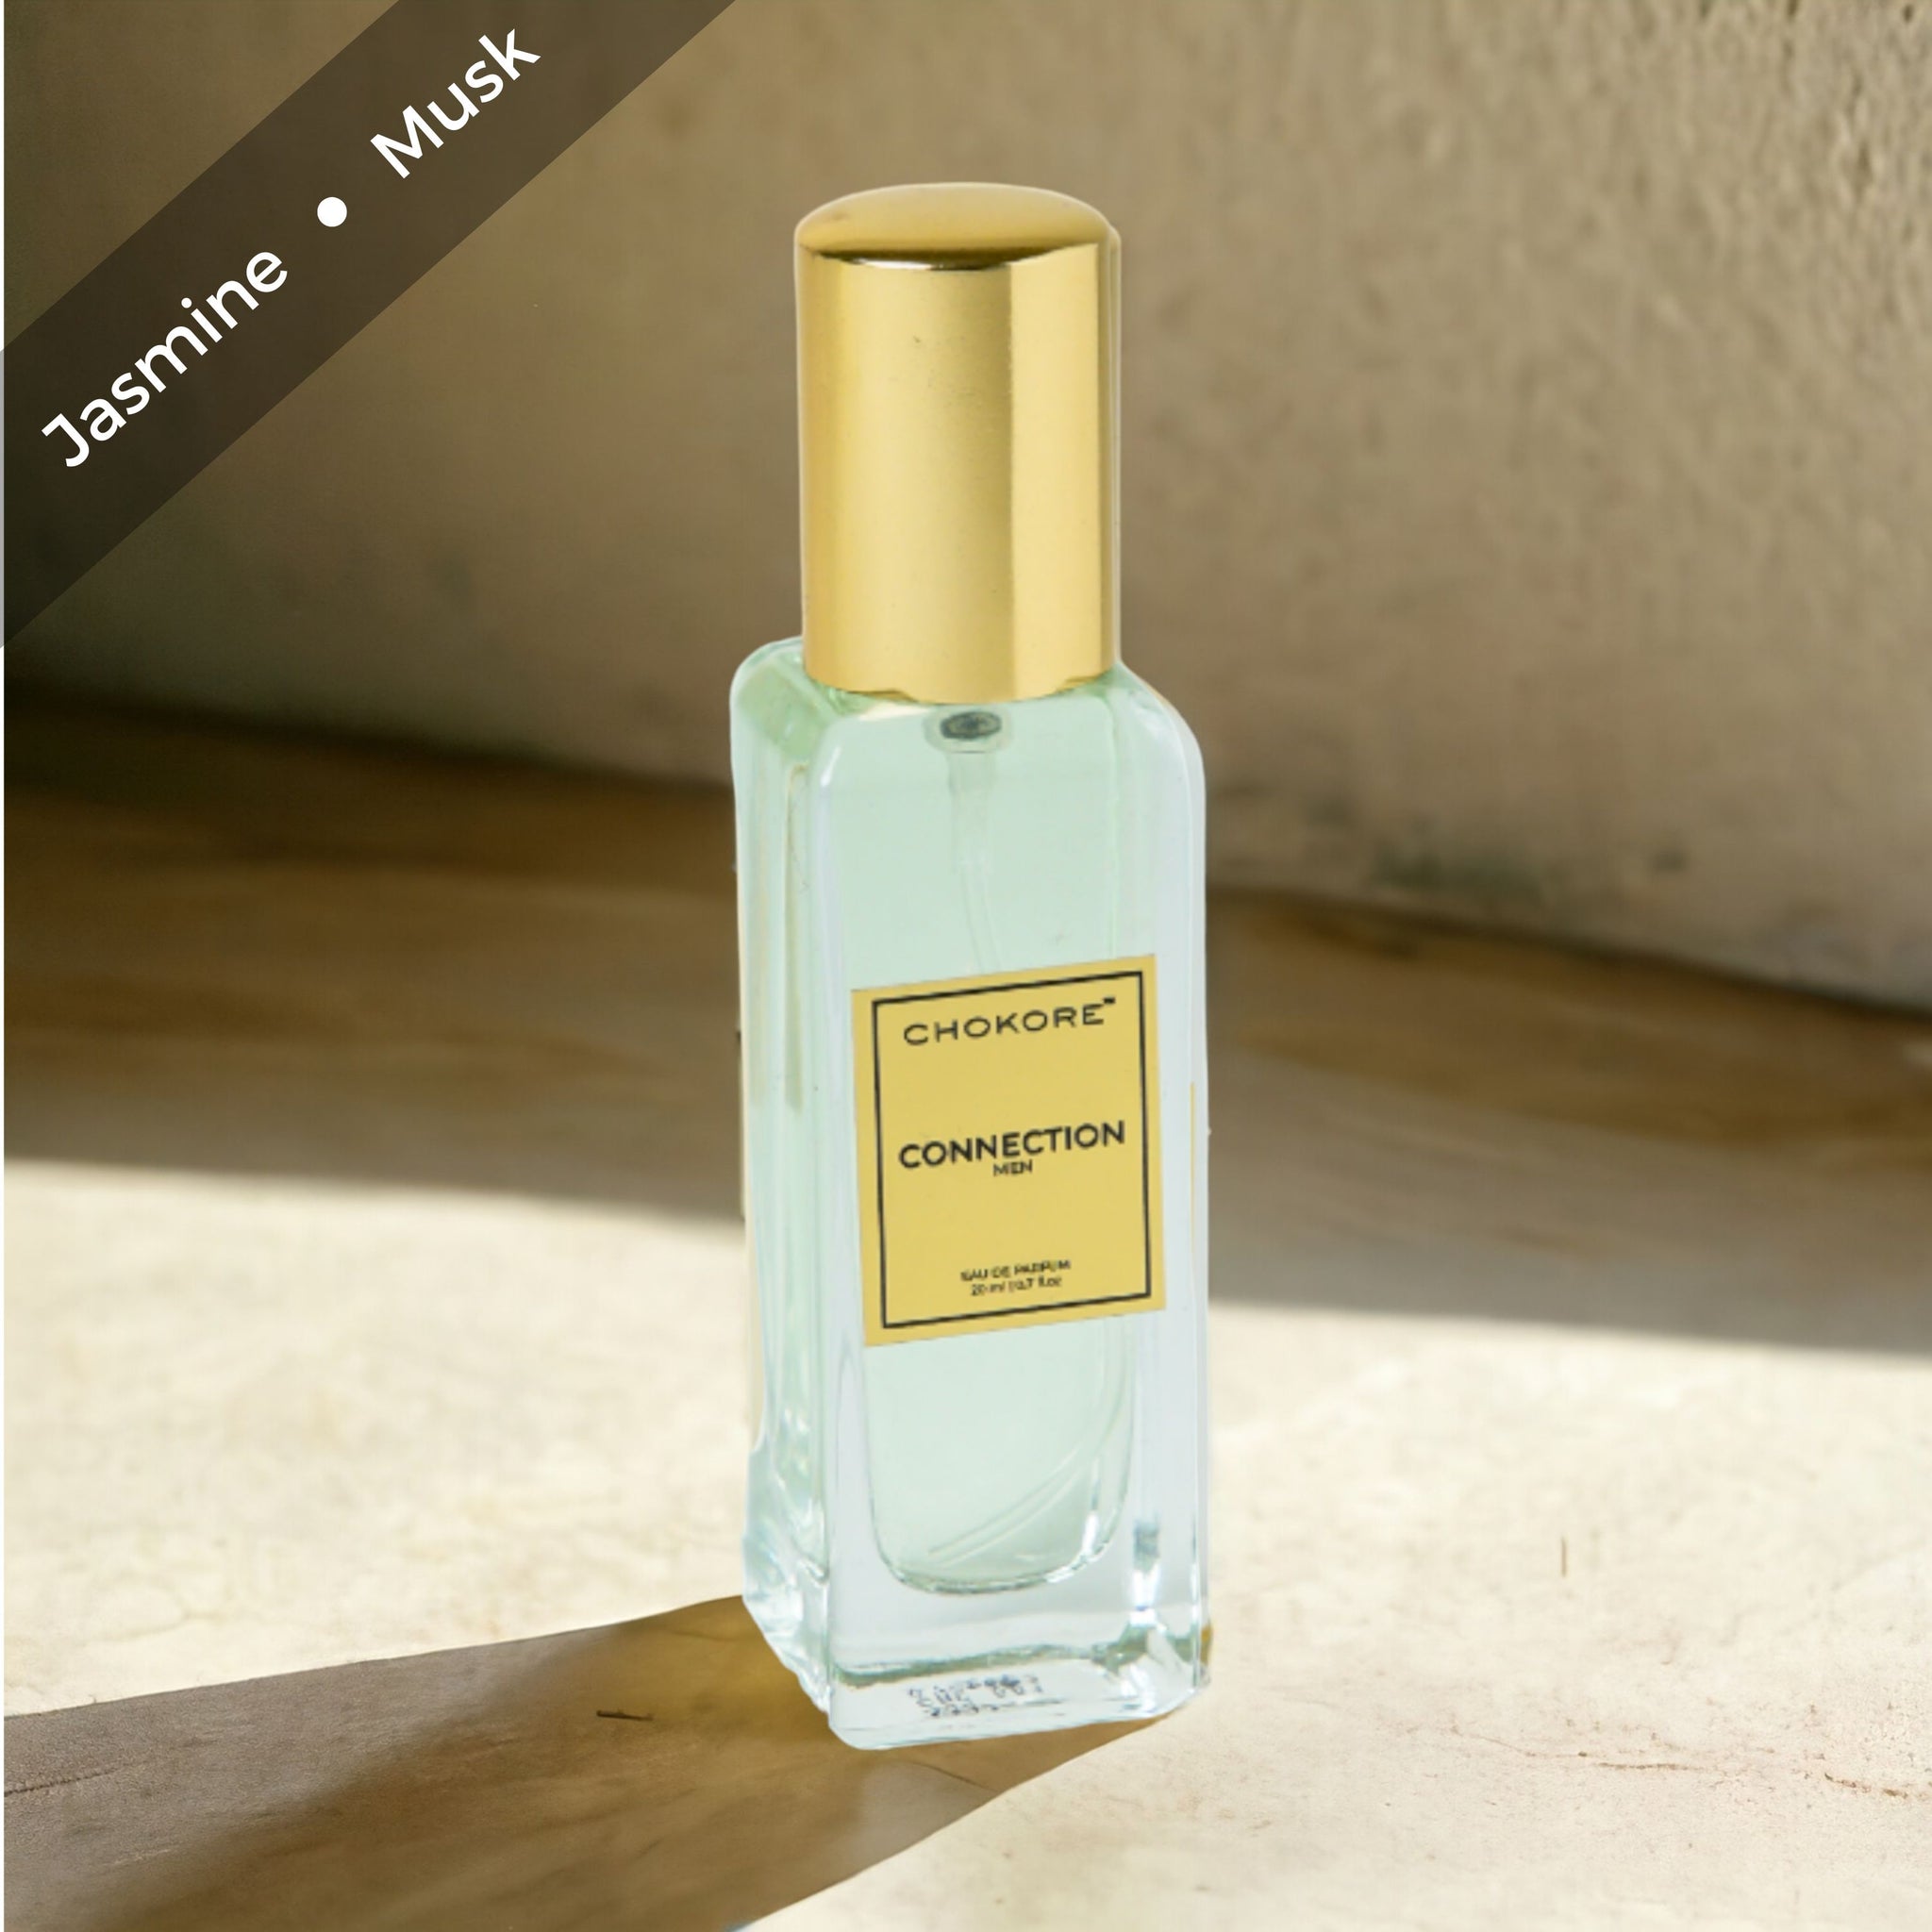 Connection - Perfume For Men | 20 ml